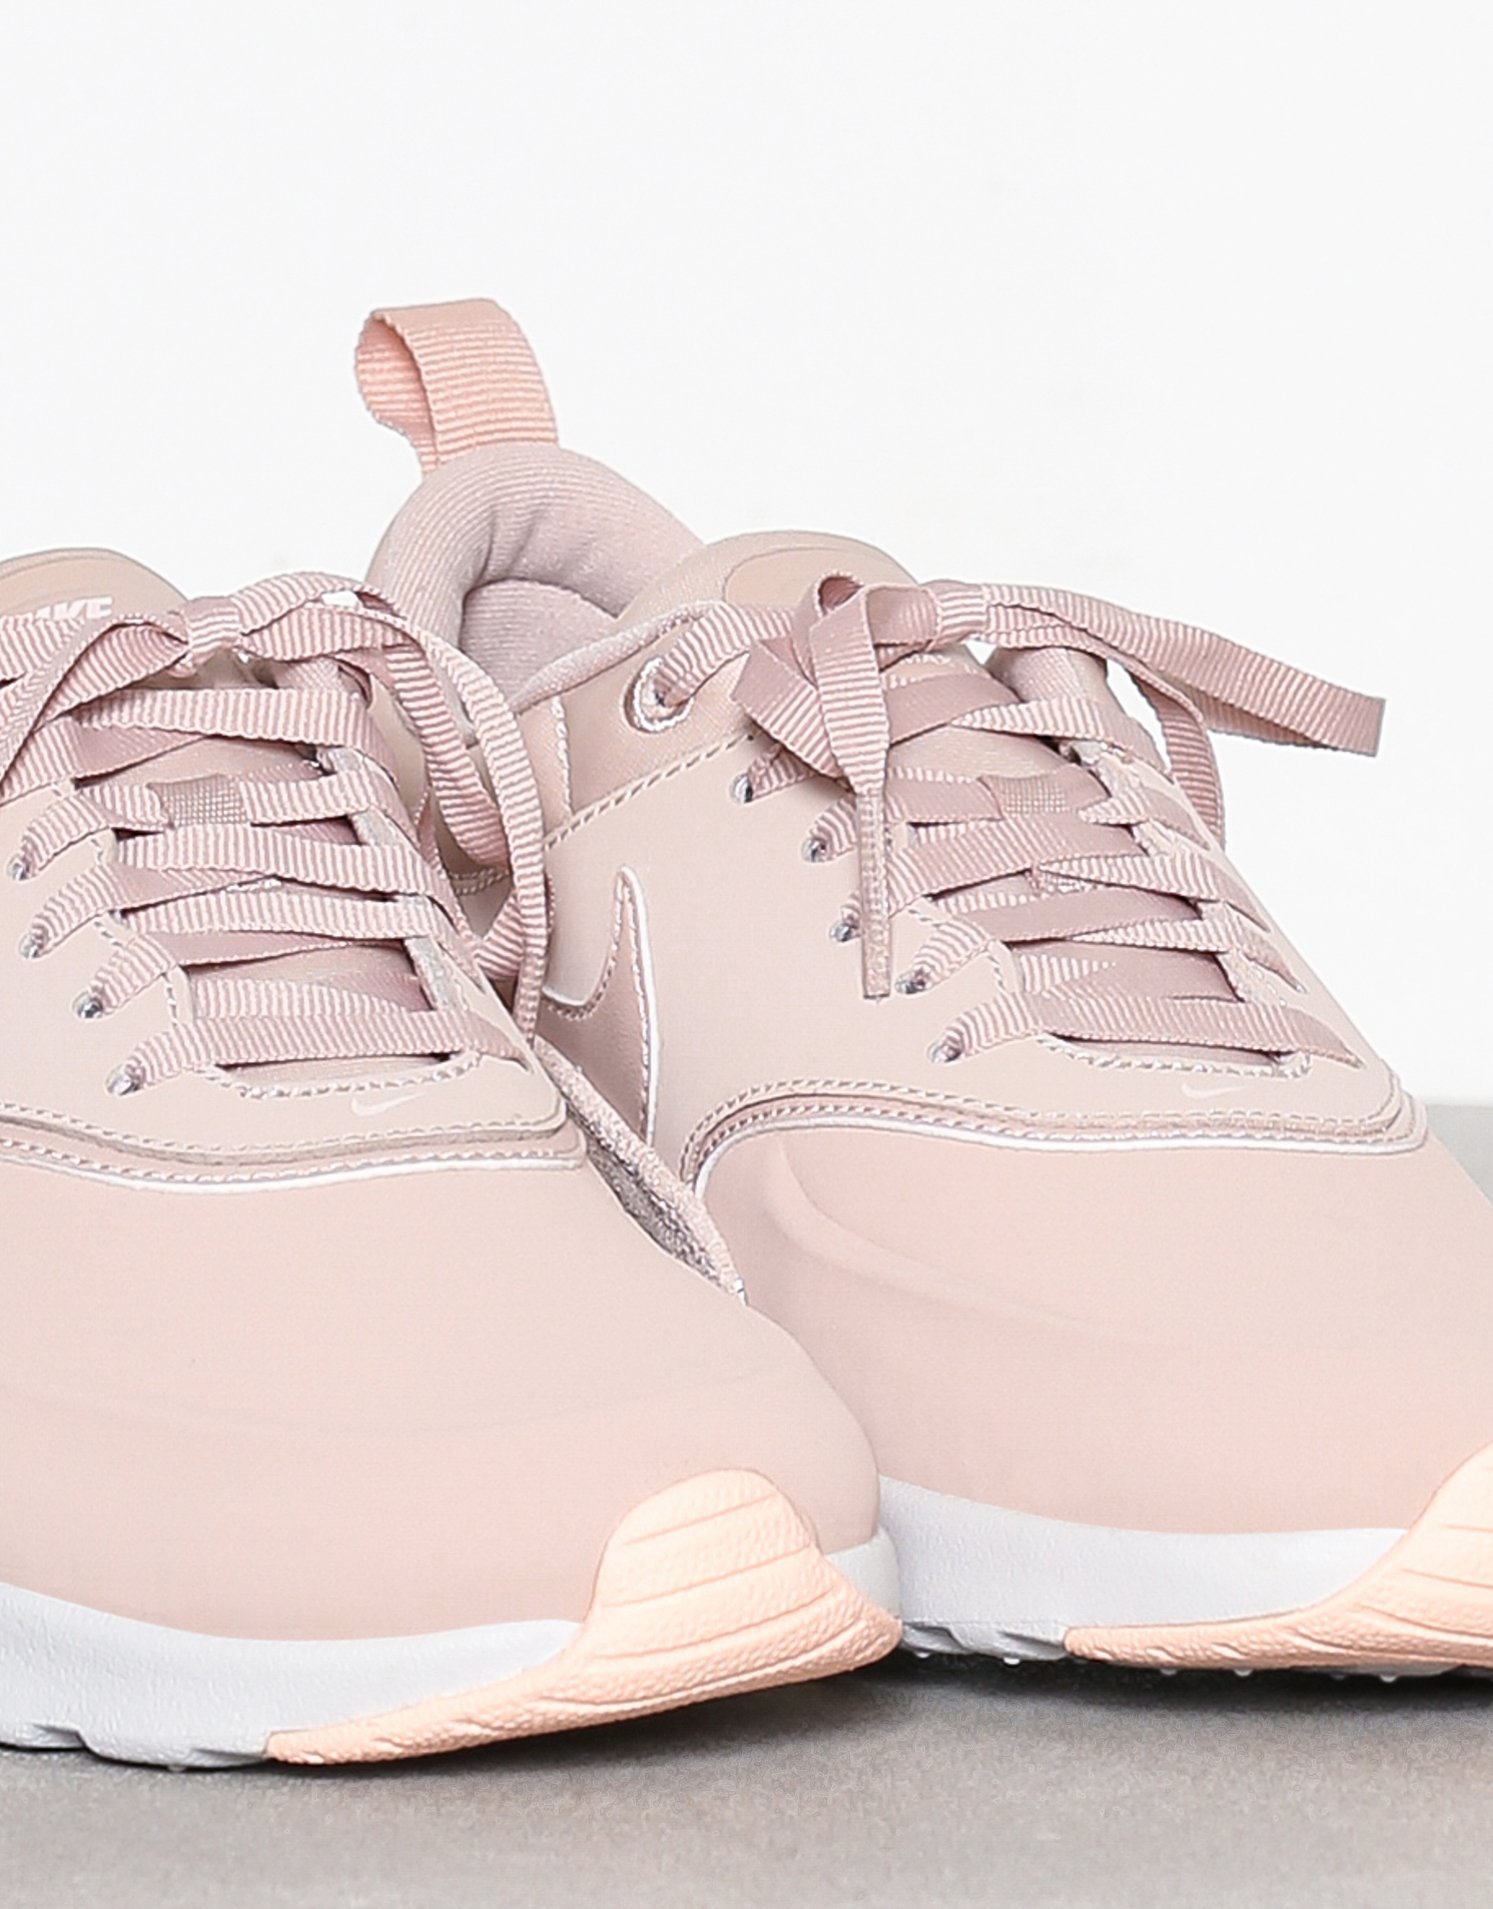 Nike Air Max Thea Particle Beige (Women's)